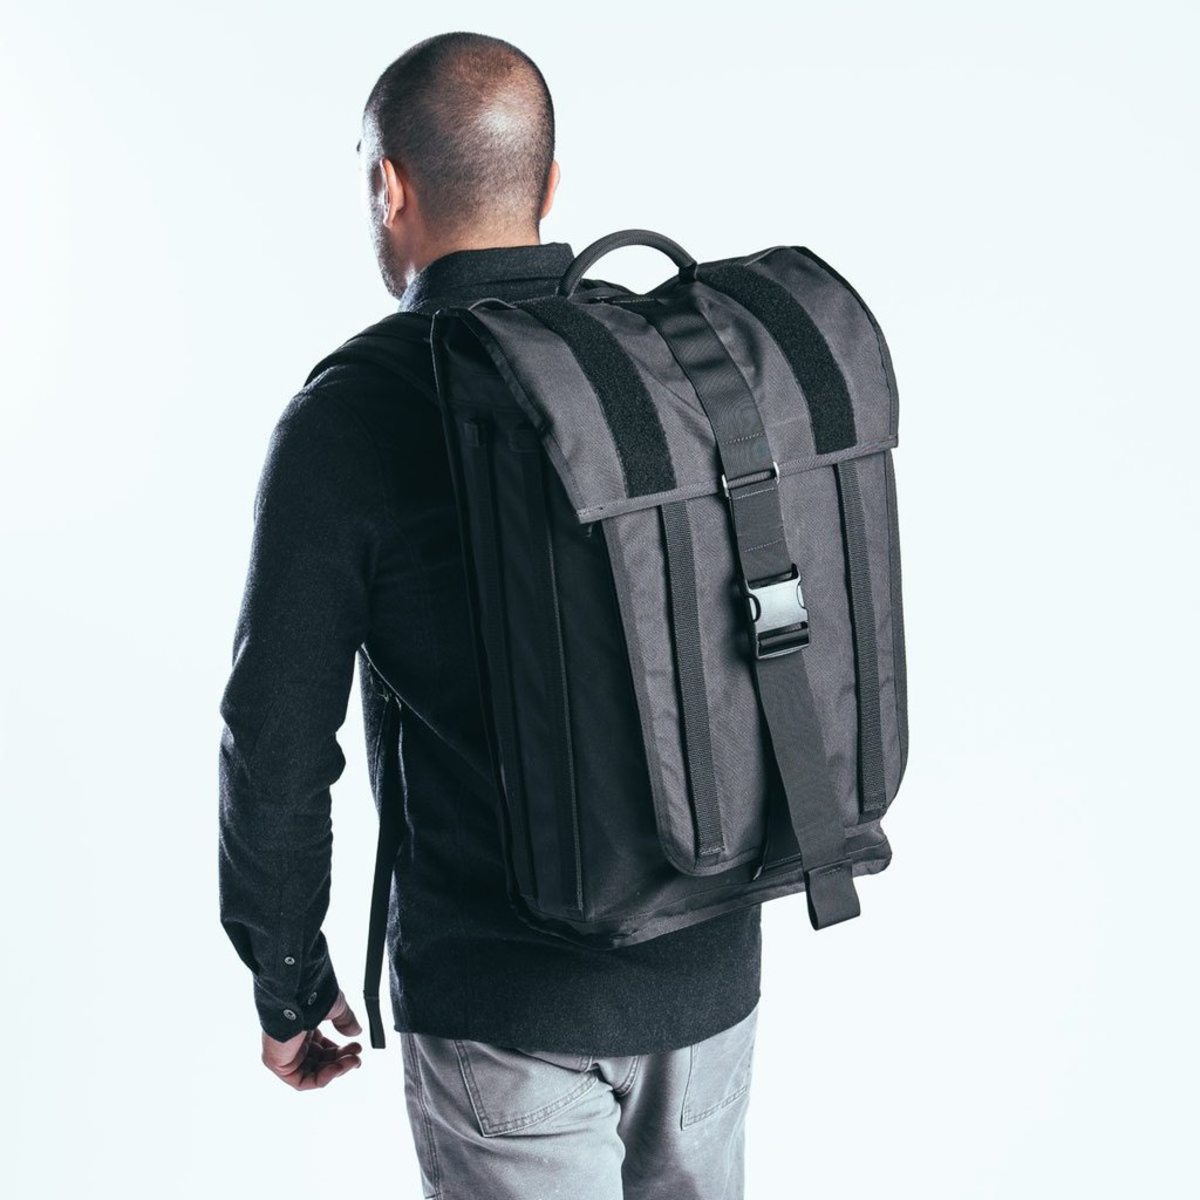 Mission Workshop hits the road with their new Radian travel pack - Acquire